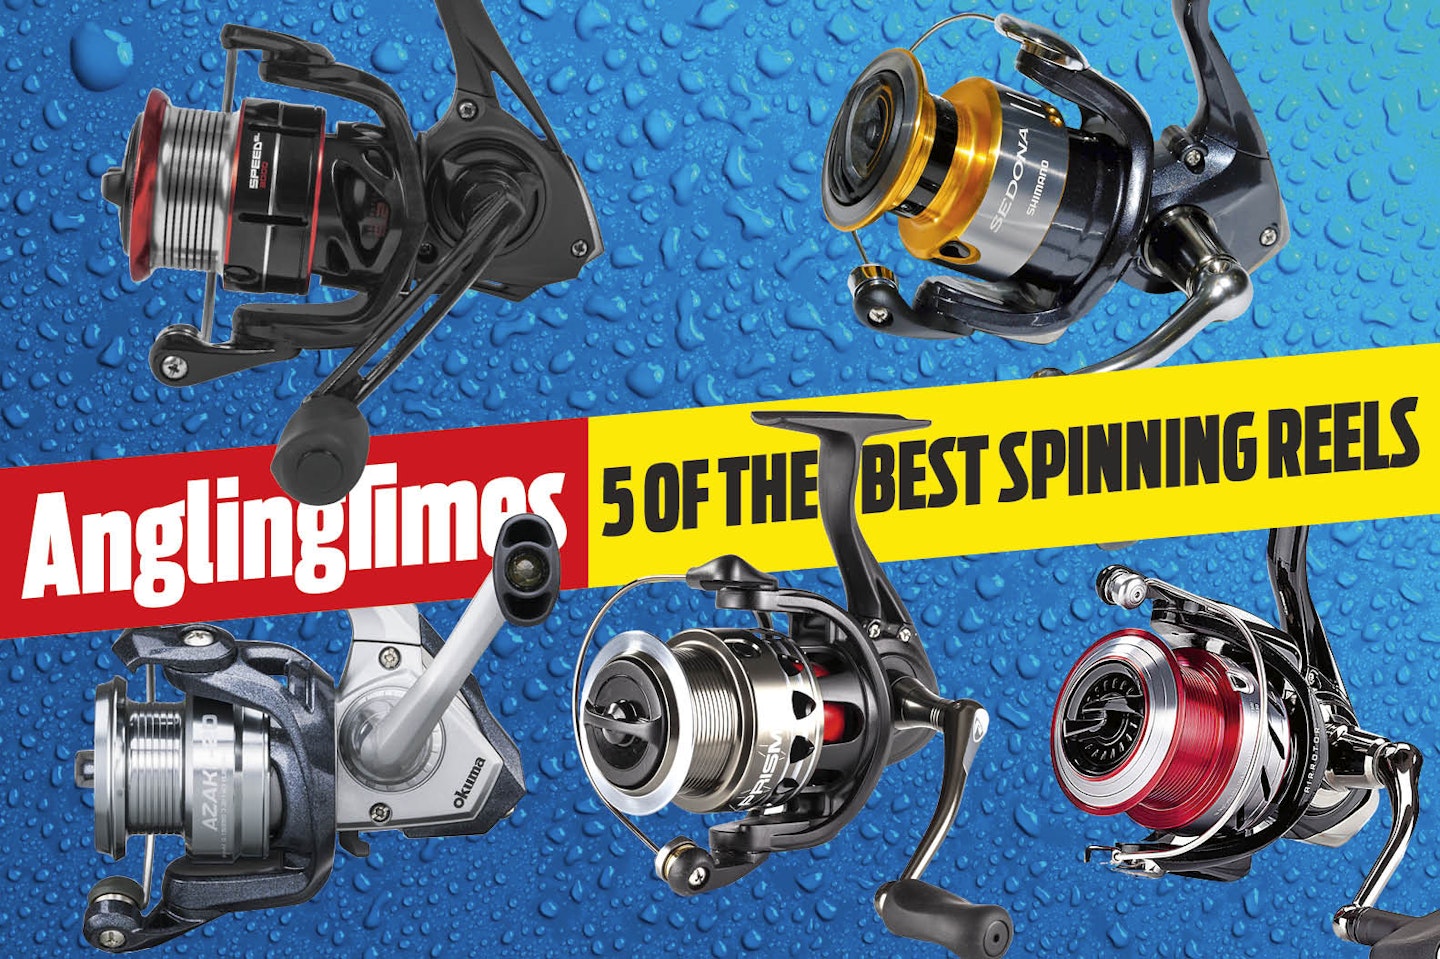 Five of the best spinning reels